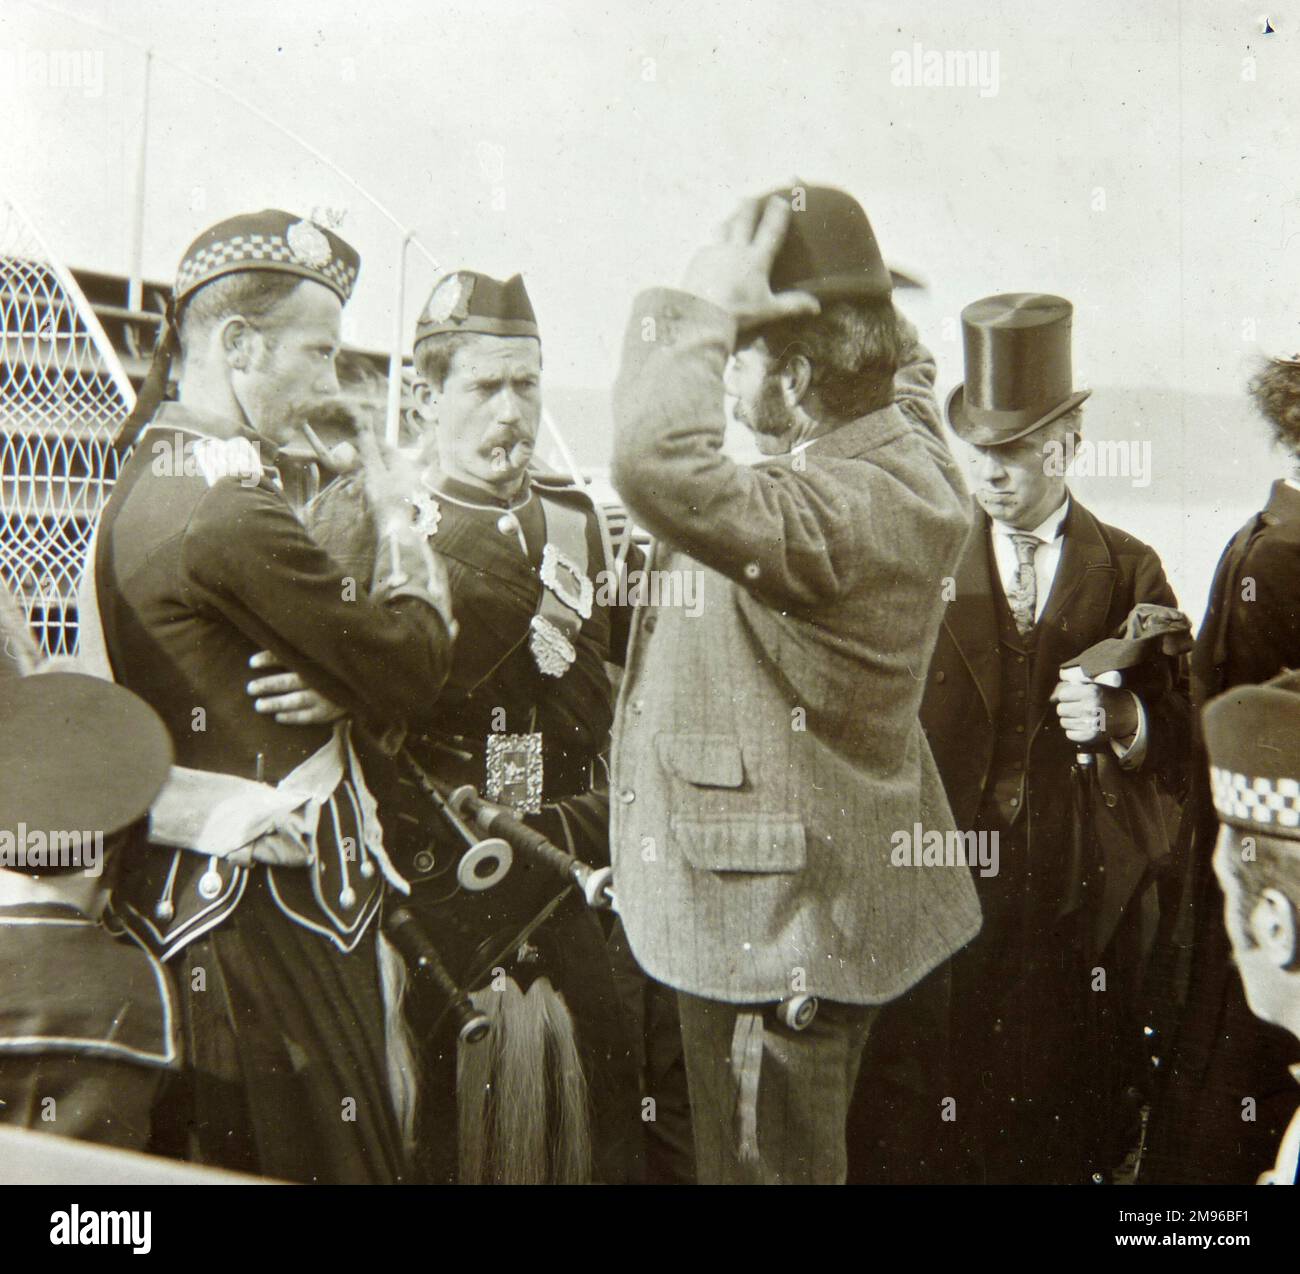 A group of passengers waiting to board a boat.  There are two Scottish pipers in traditional costume on the left, a man in a bowler hat in the middle, and a man in a top hat on the right. Stock Photo